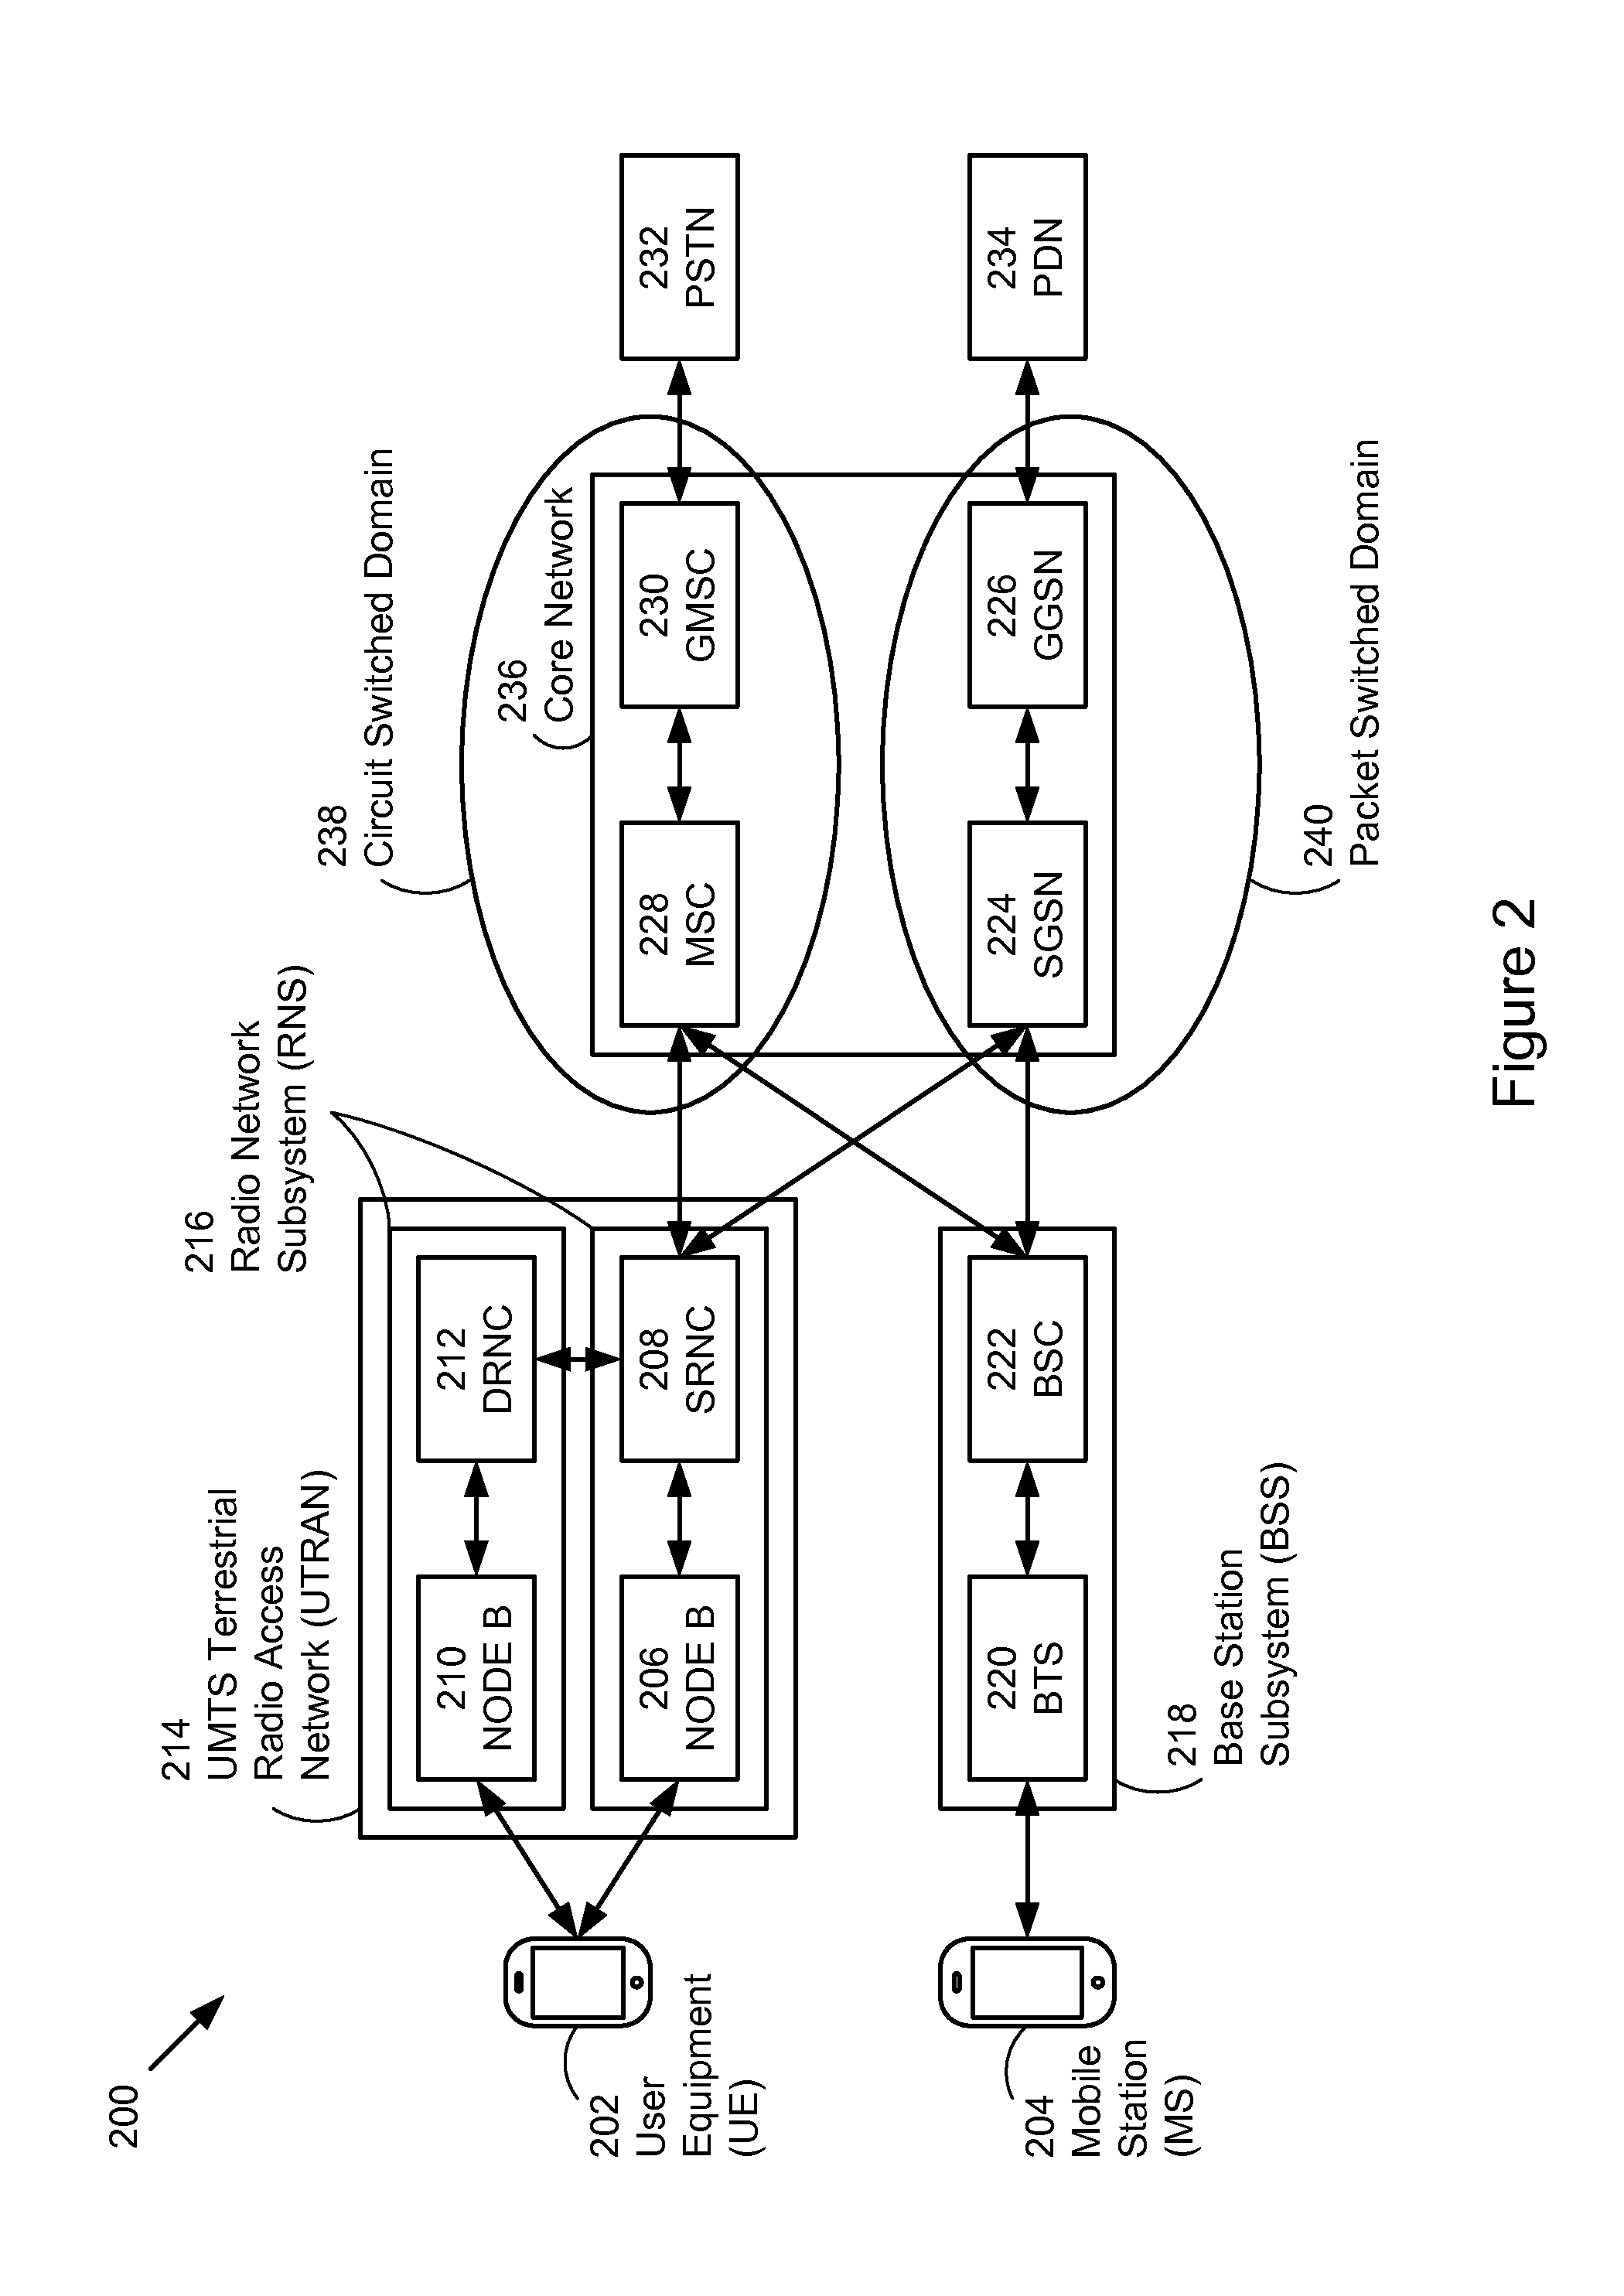 Radio resource signaling during network congestion in a mobile wireless device